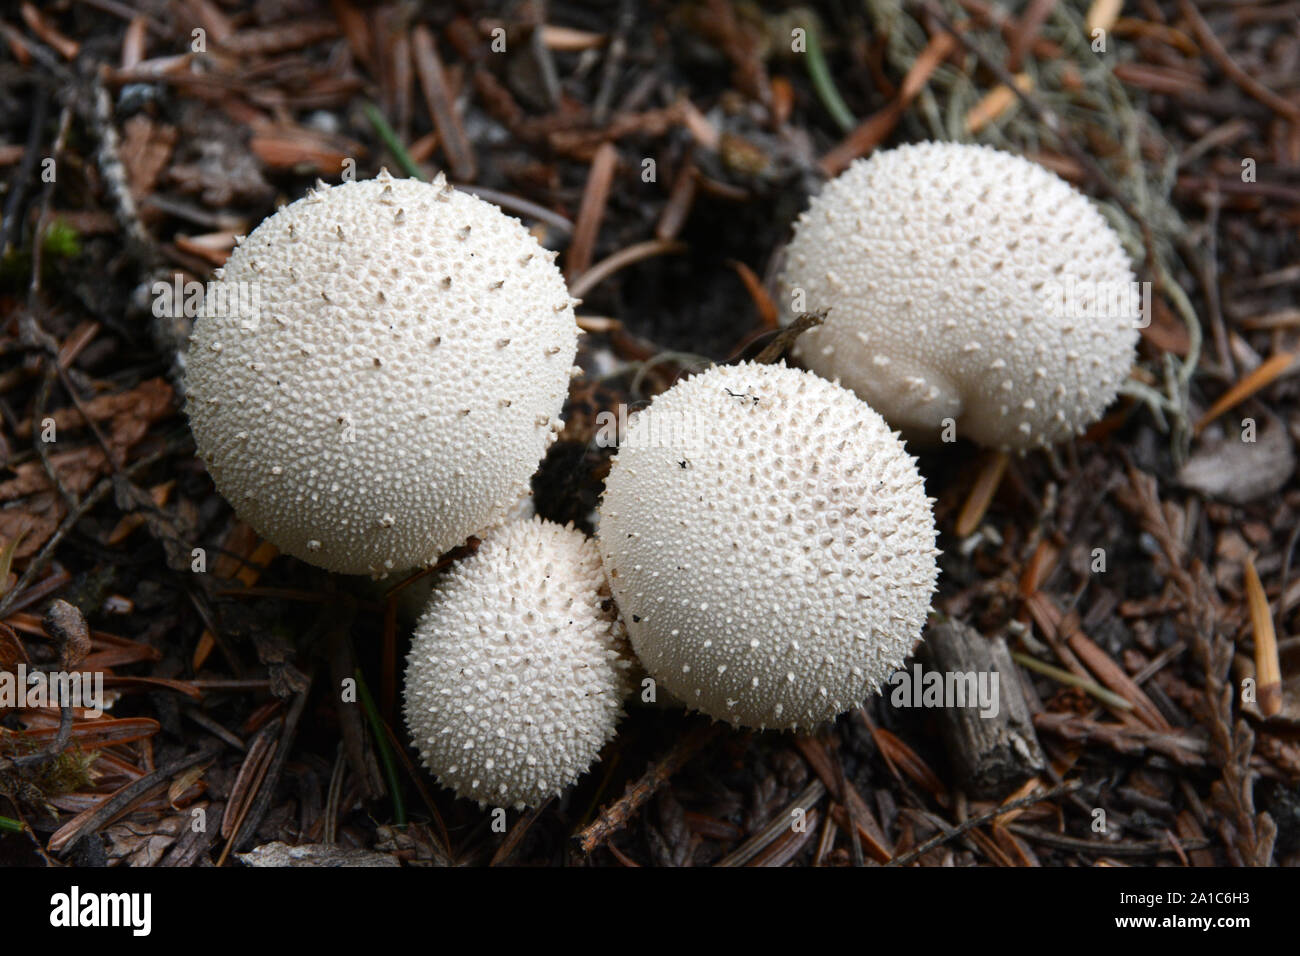 A cluster of young, round puffball mushrooms growing on the coniferous forest floor in the Kootenay region of British Columbia, Canada. Stock Photo